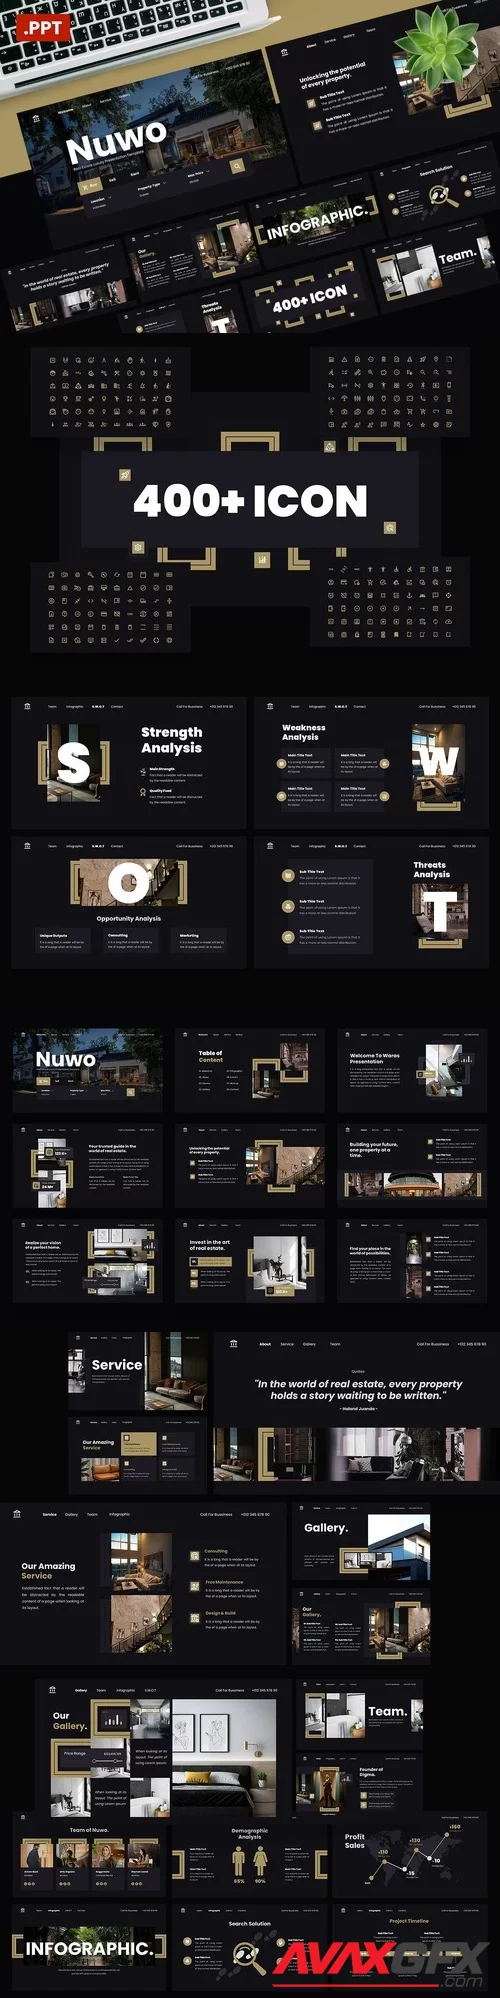 Nuwo - Real Estate Agency Powerpoint Template SUTNYNR [PPTX]